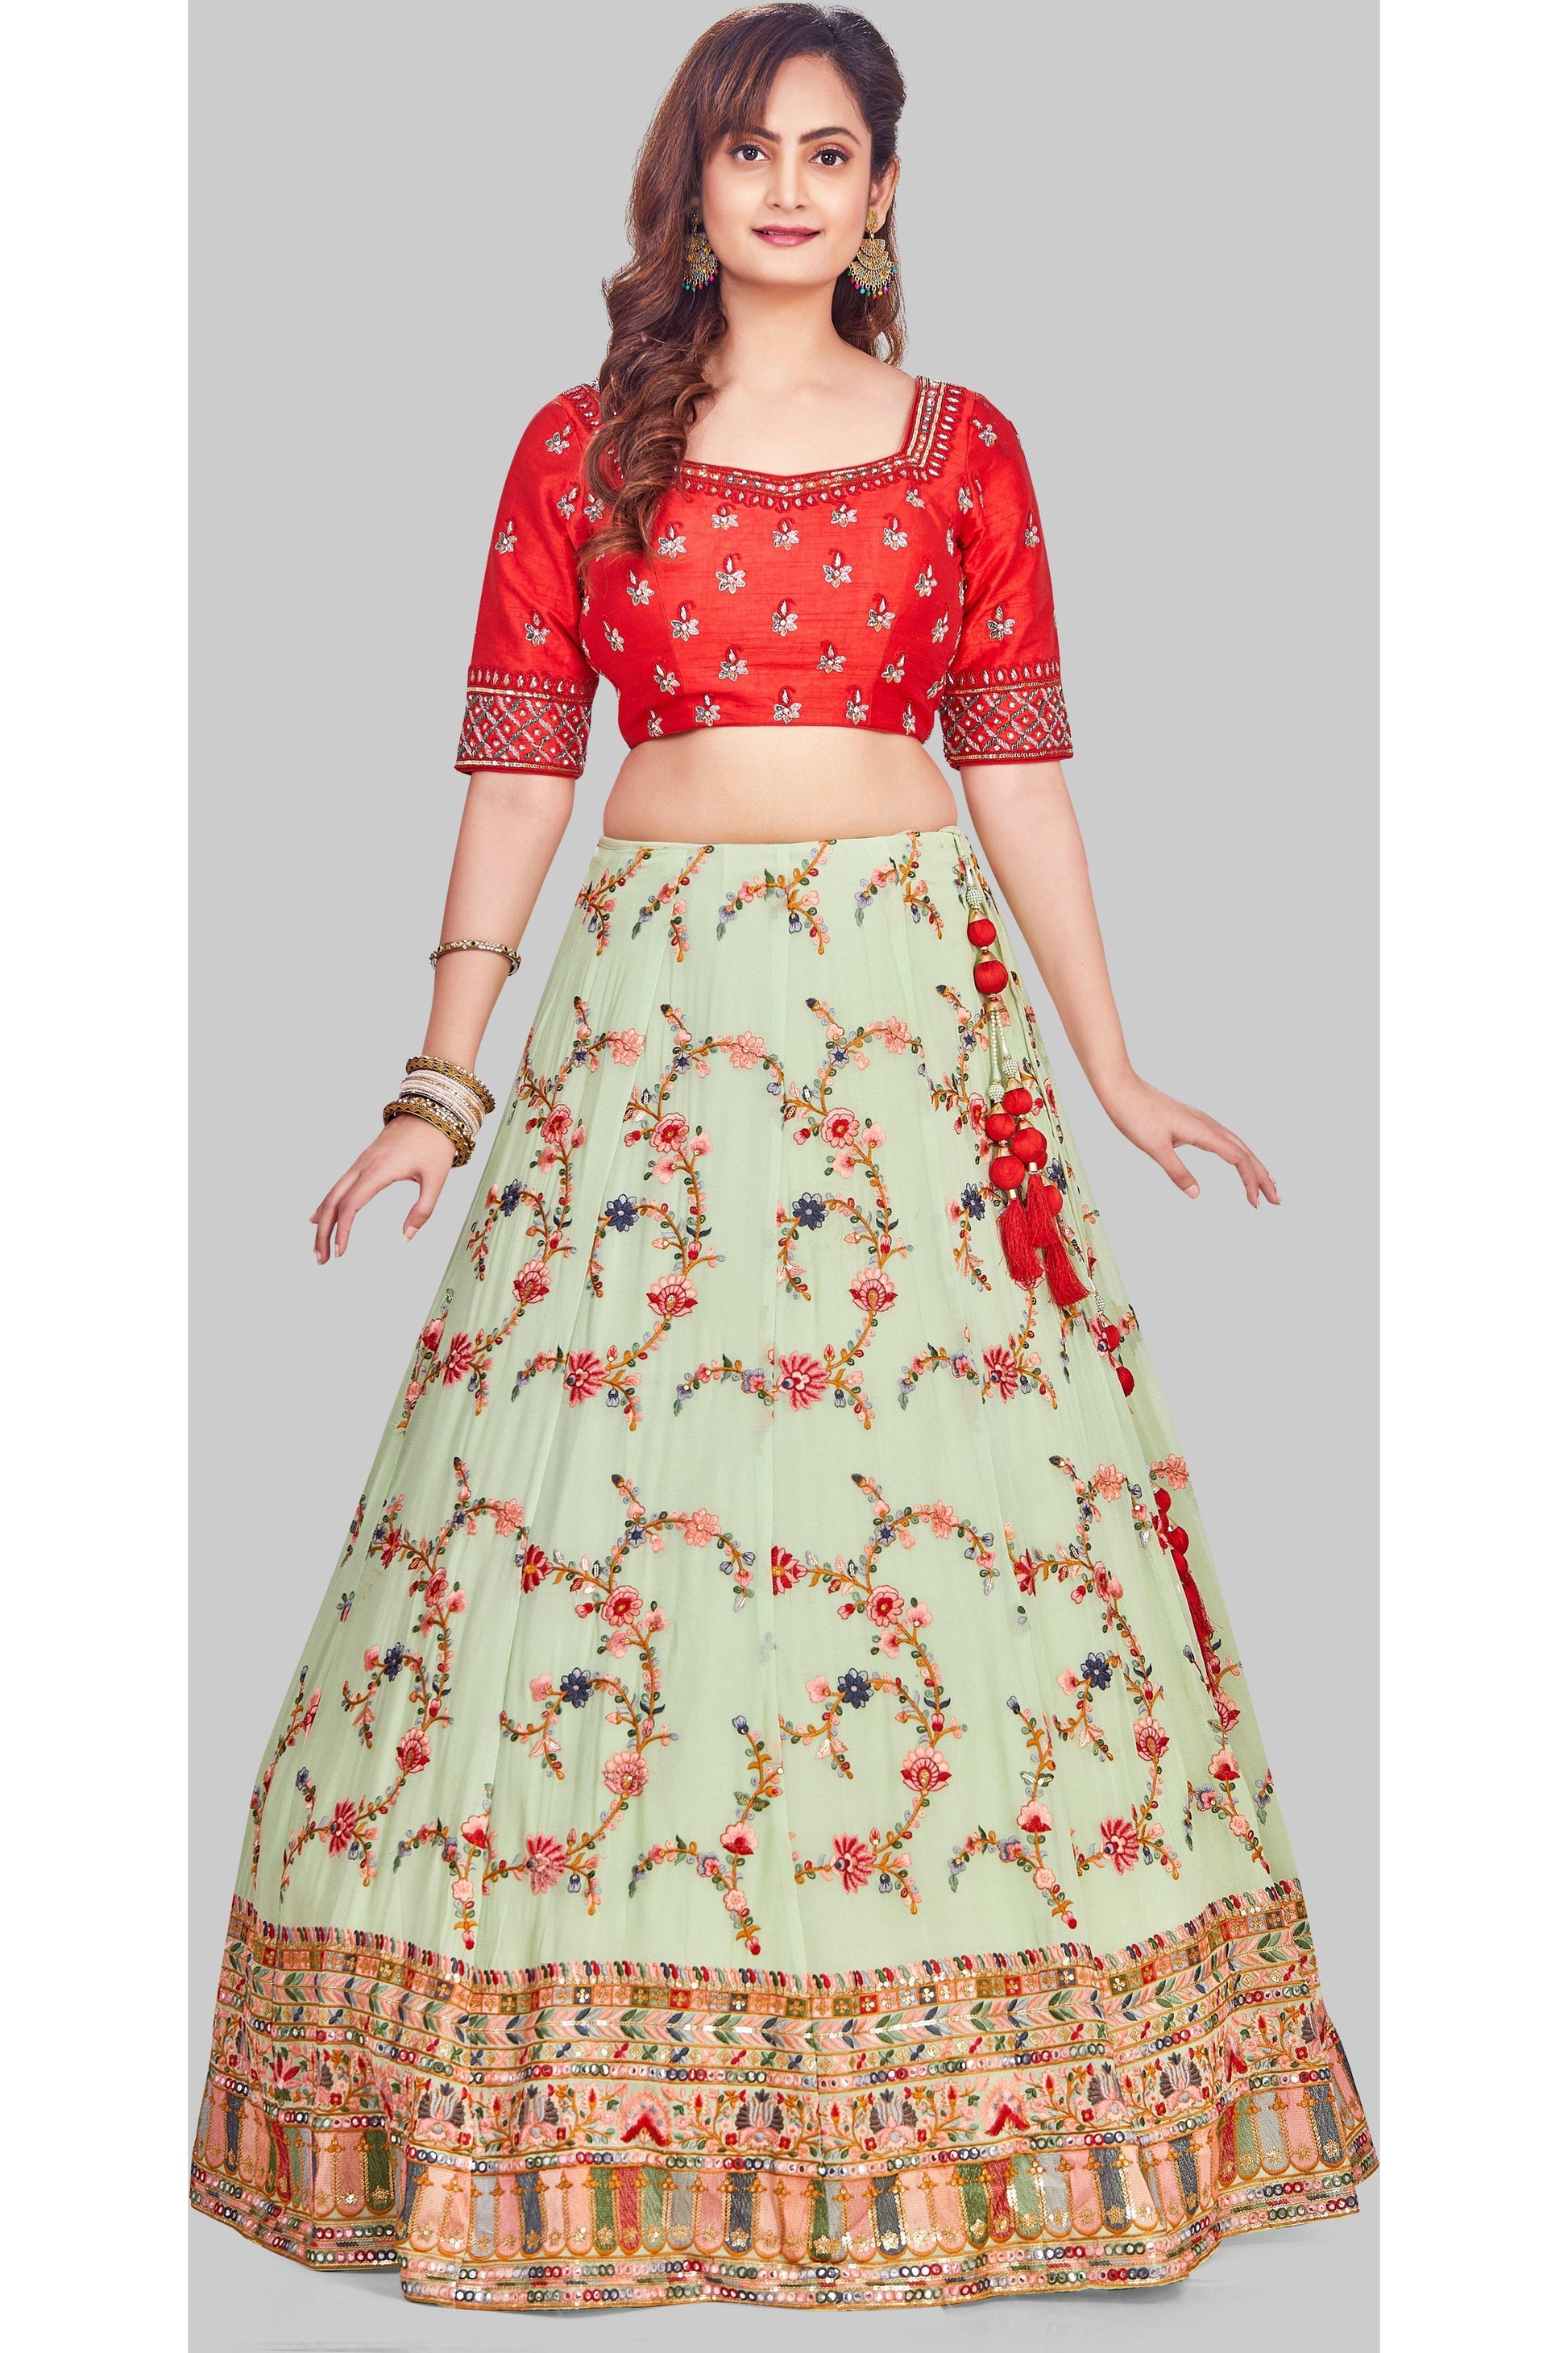 Contrasting Red and Green Embroidered Lehenga Set-AariAmi Boutique